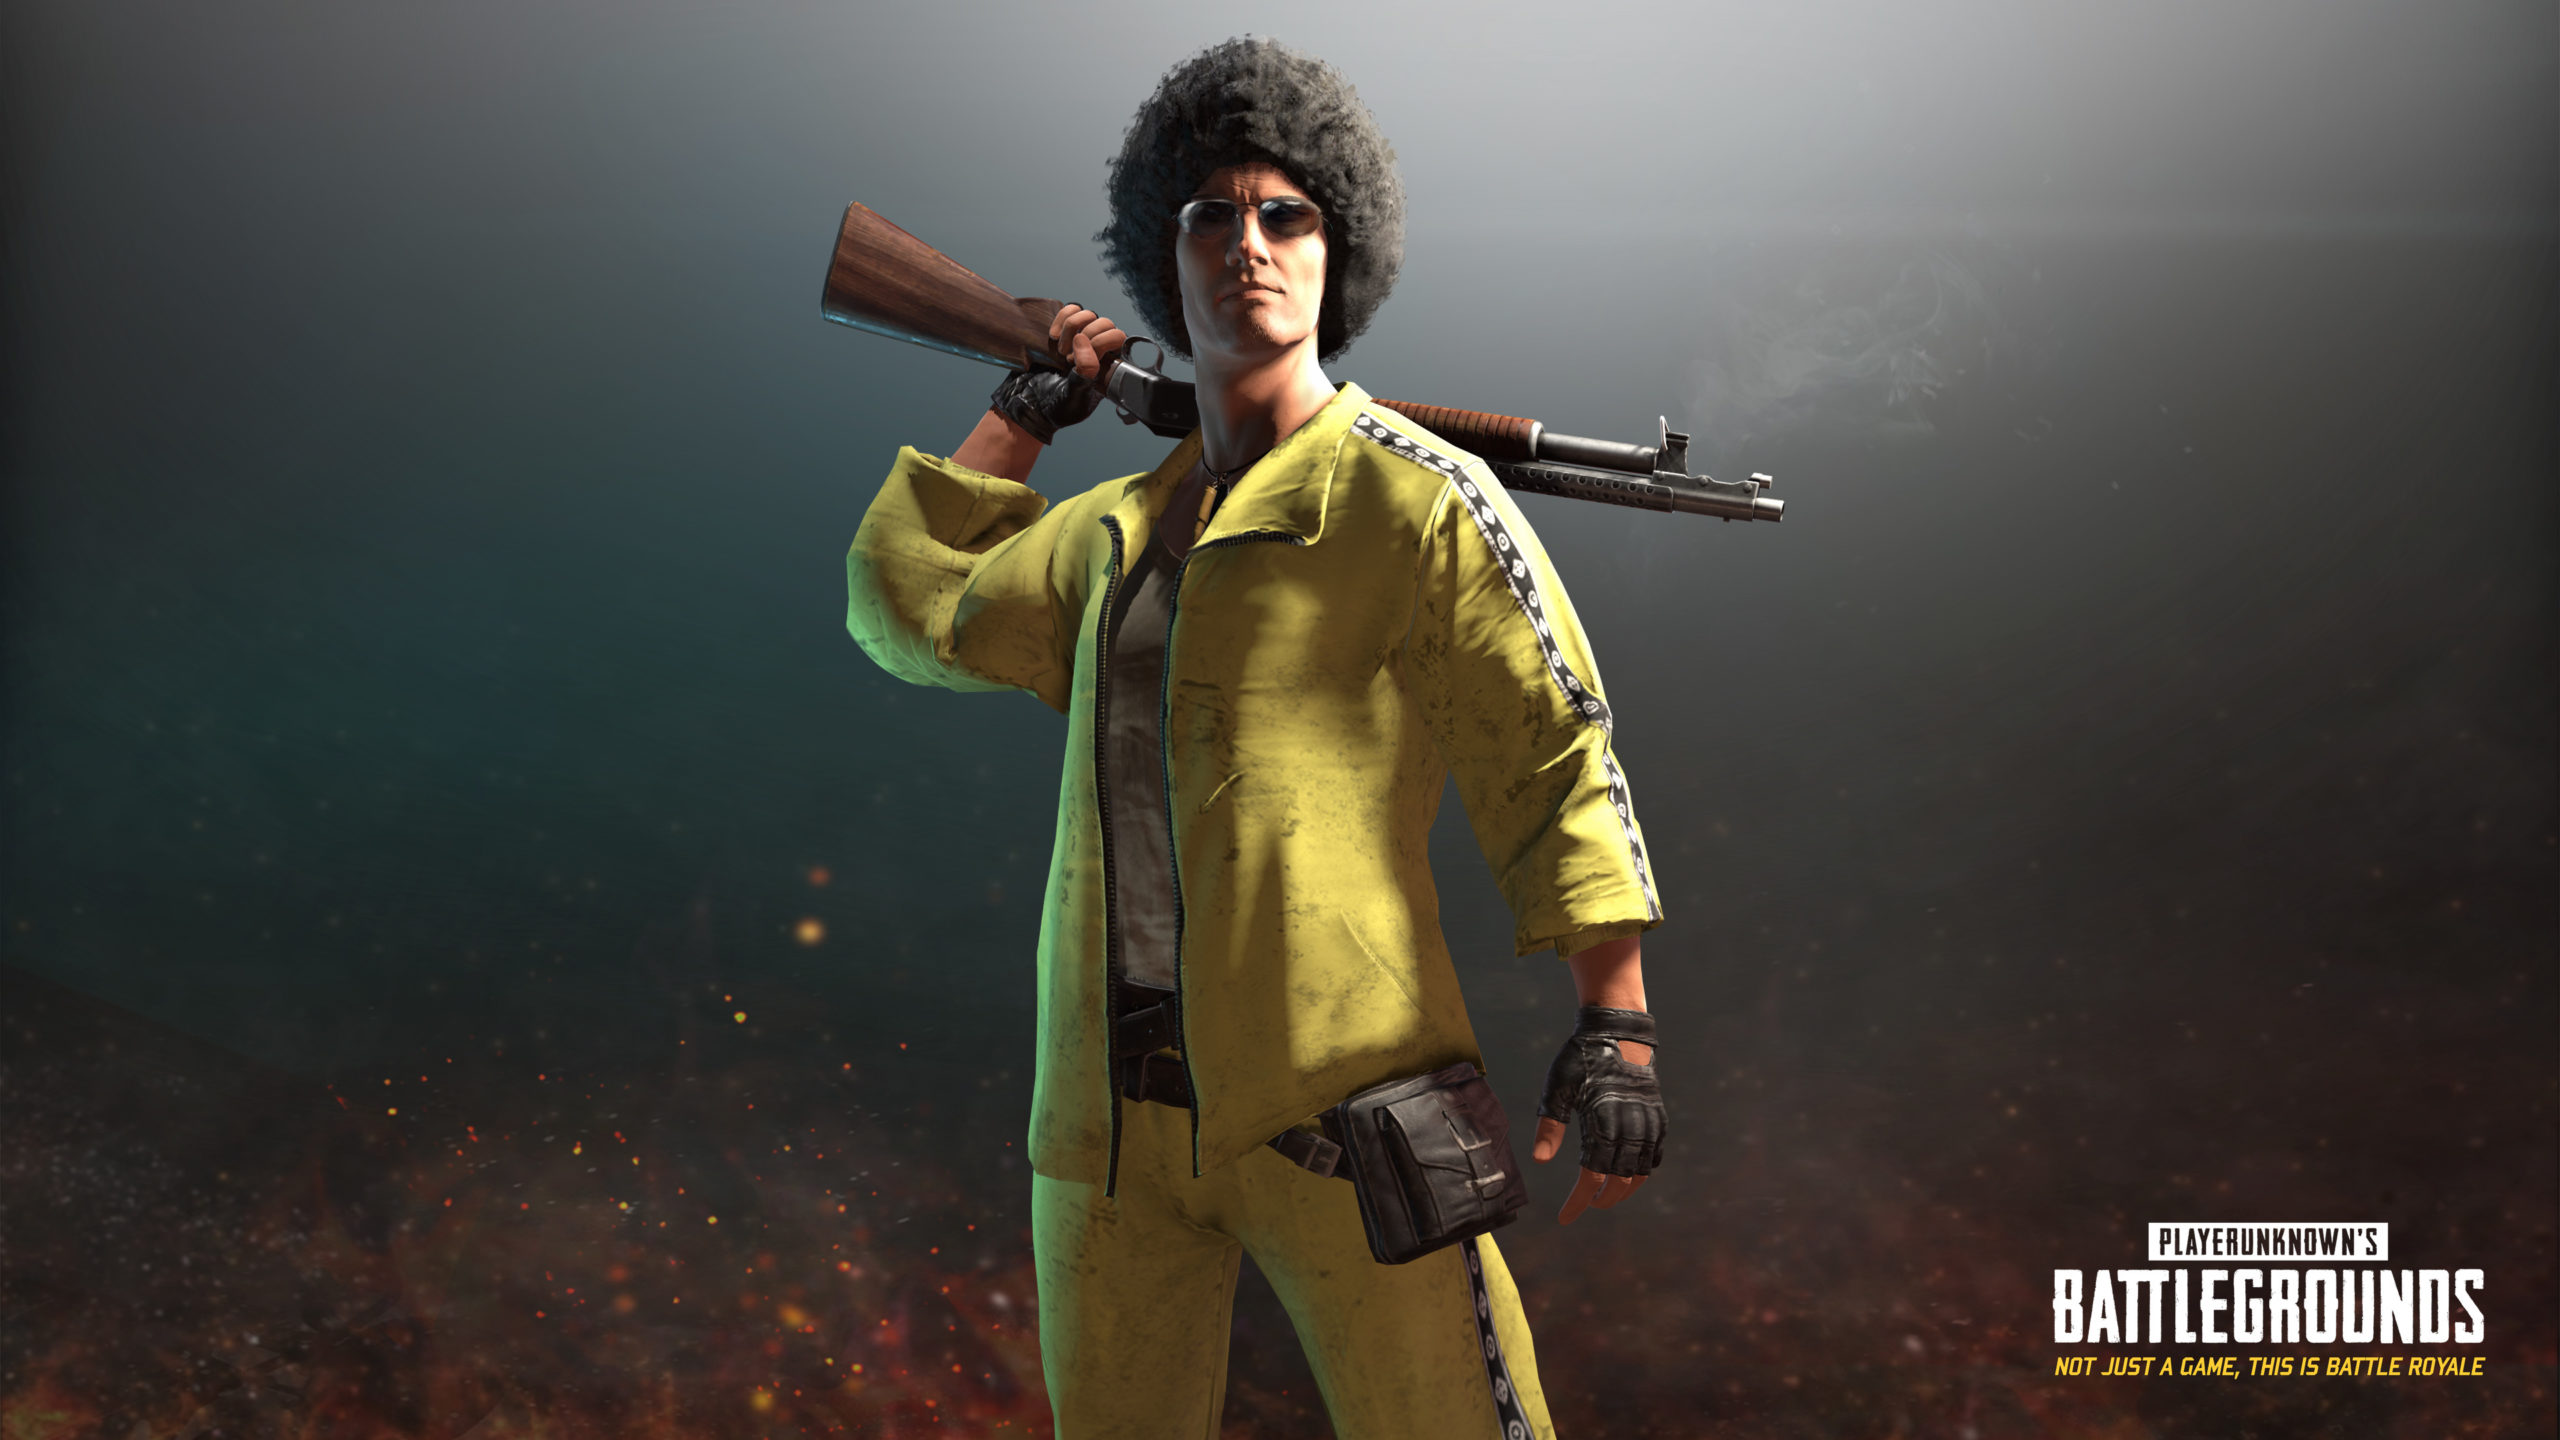 Battlegrounds’ New Skins Look Stylish, But They Will Cost You